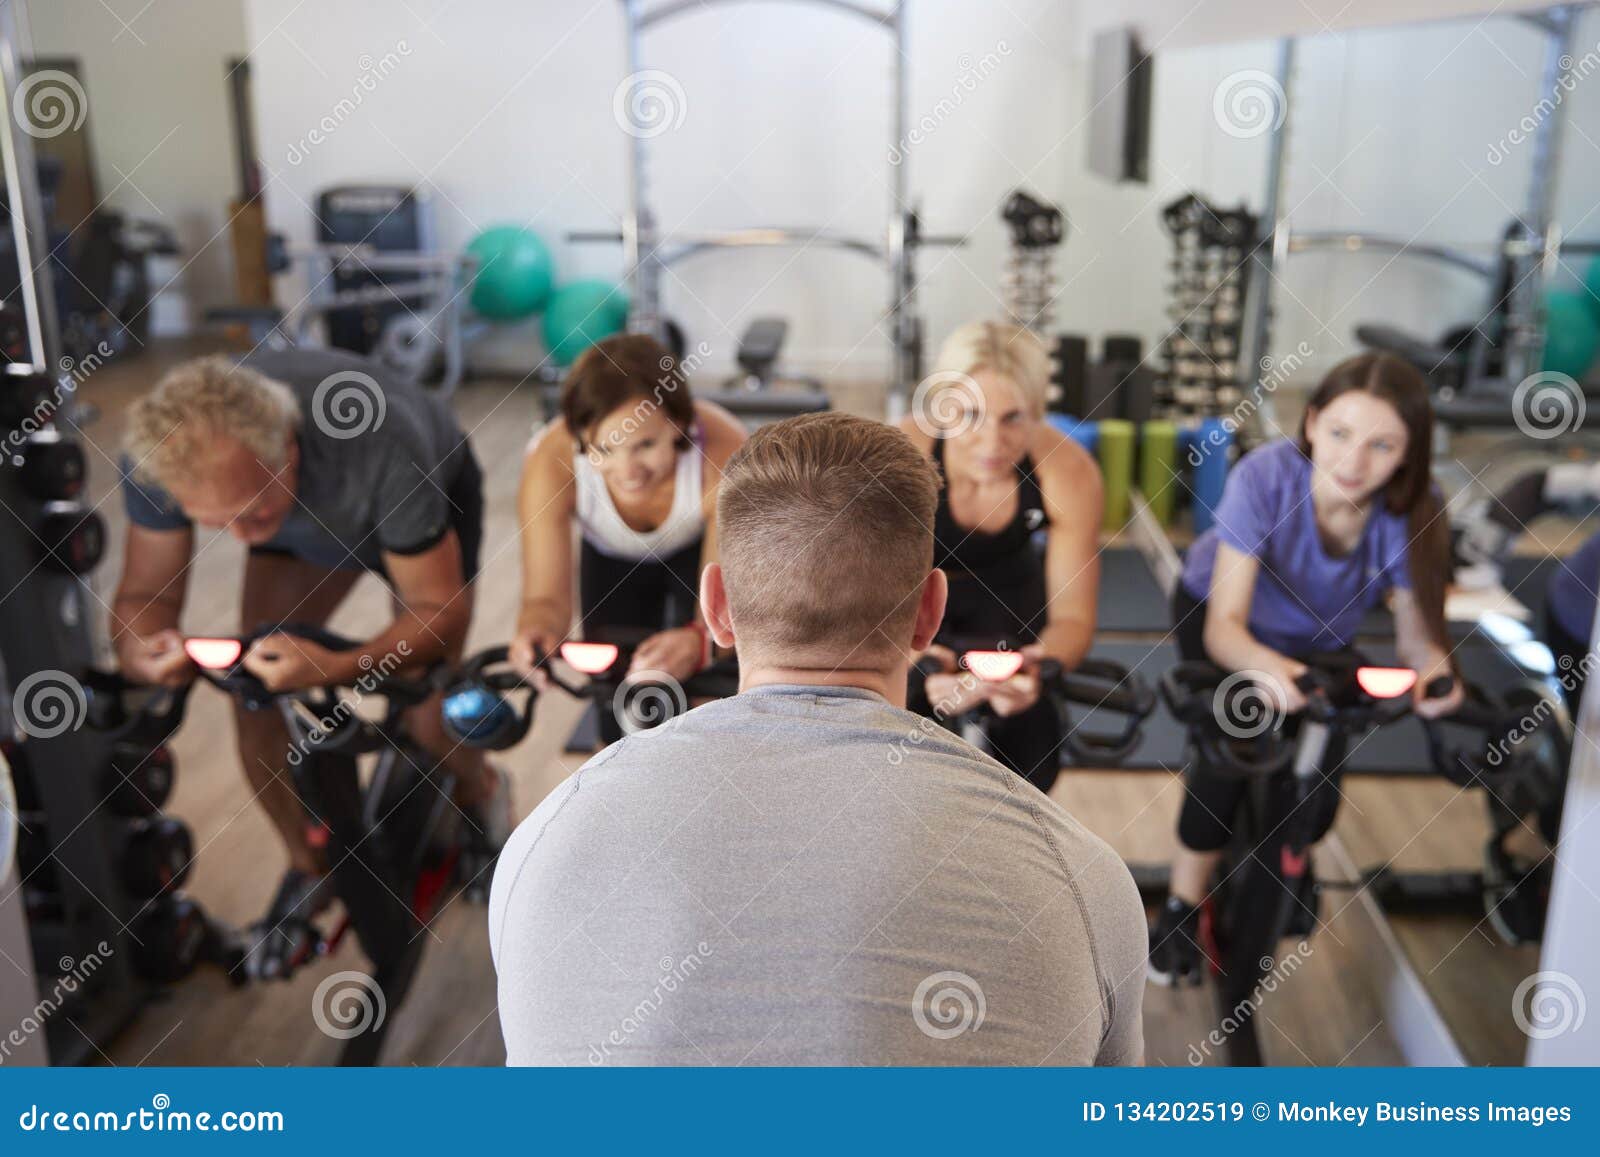 rear view of male trainer taking spin class in gym